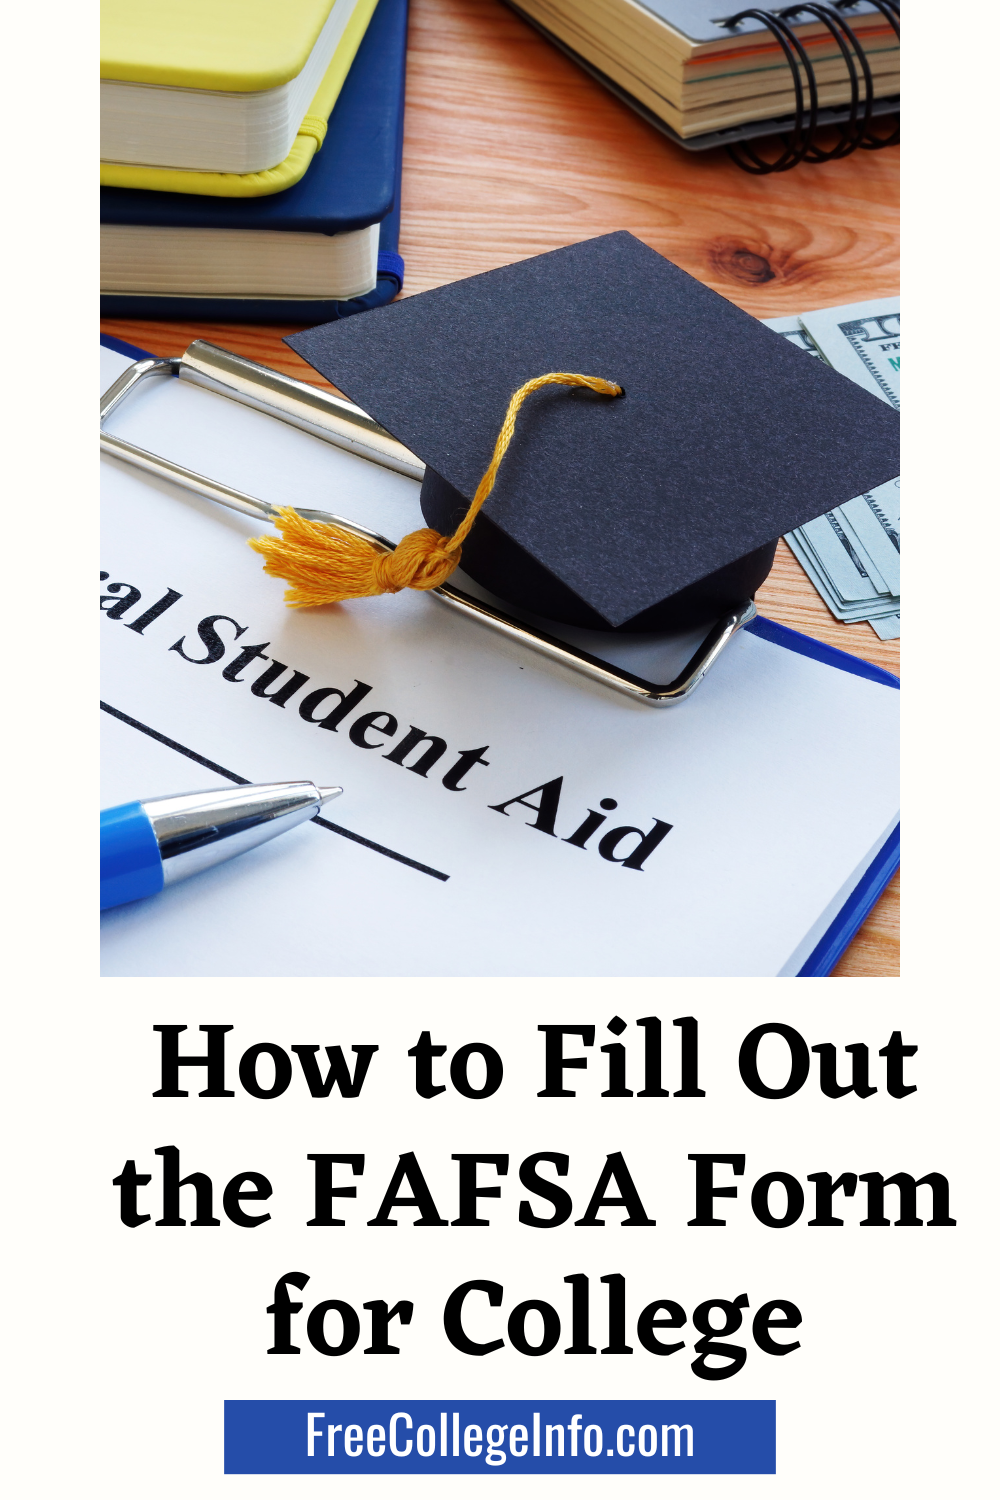 How to Fill Out the FAFSA Form for College Tips and Tricks